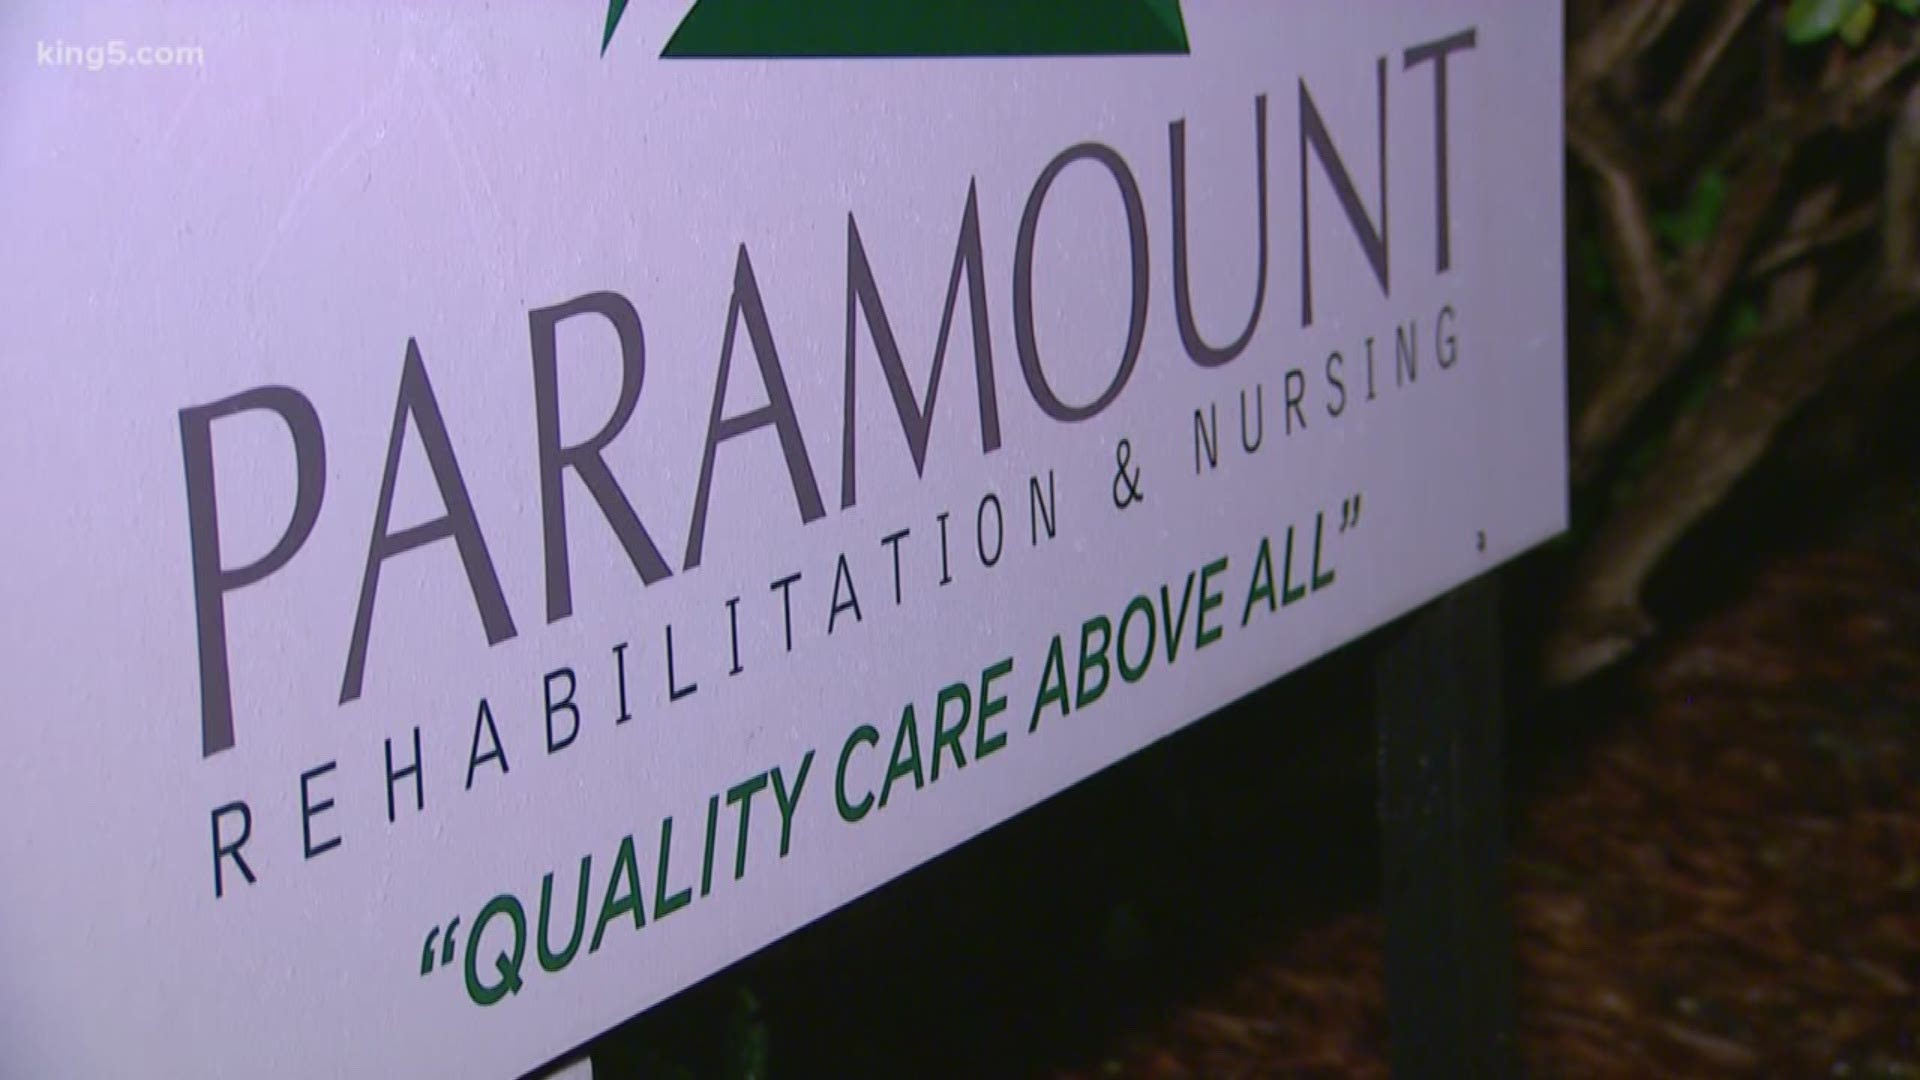 The U.S. Department of Health and Human Services considers Paramount to be among the 50 worst-performing nursing homes in the country.